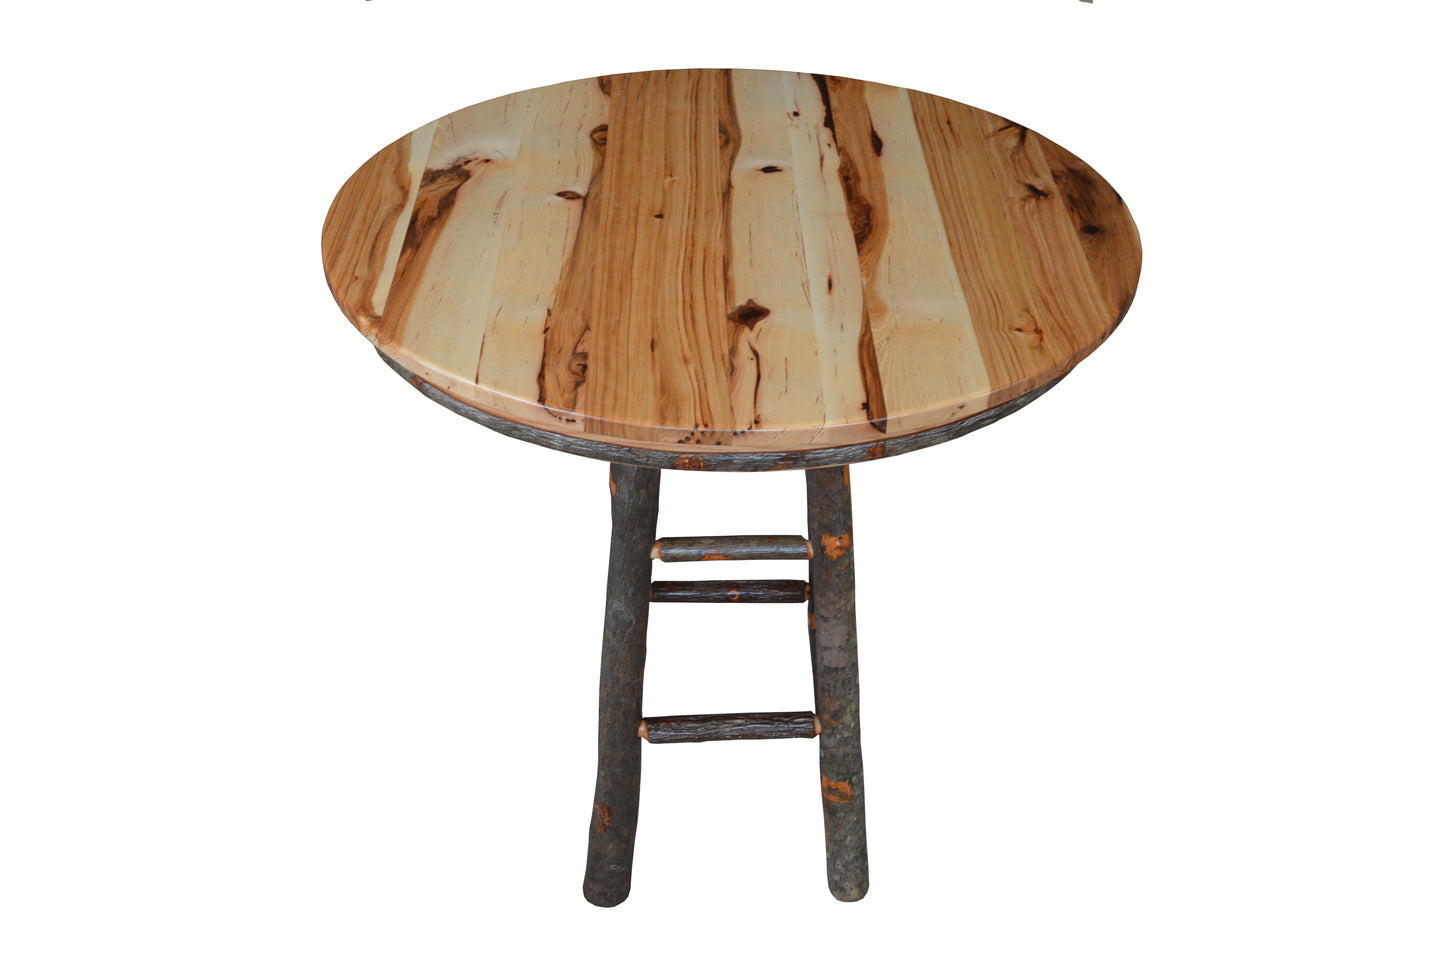 A&L Furniture Co. 42" Round Hickory Bar Table - LEAD TIME TO SHIP 10 BUSINESS DAYS